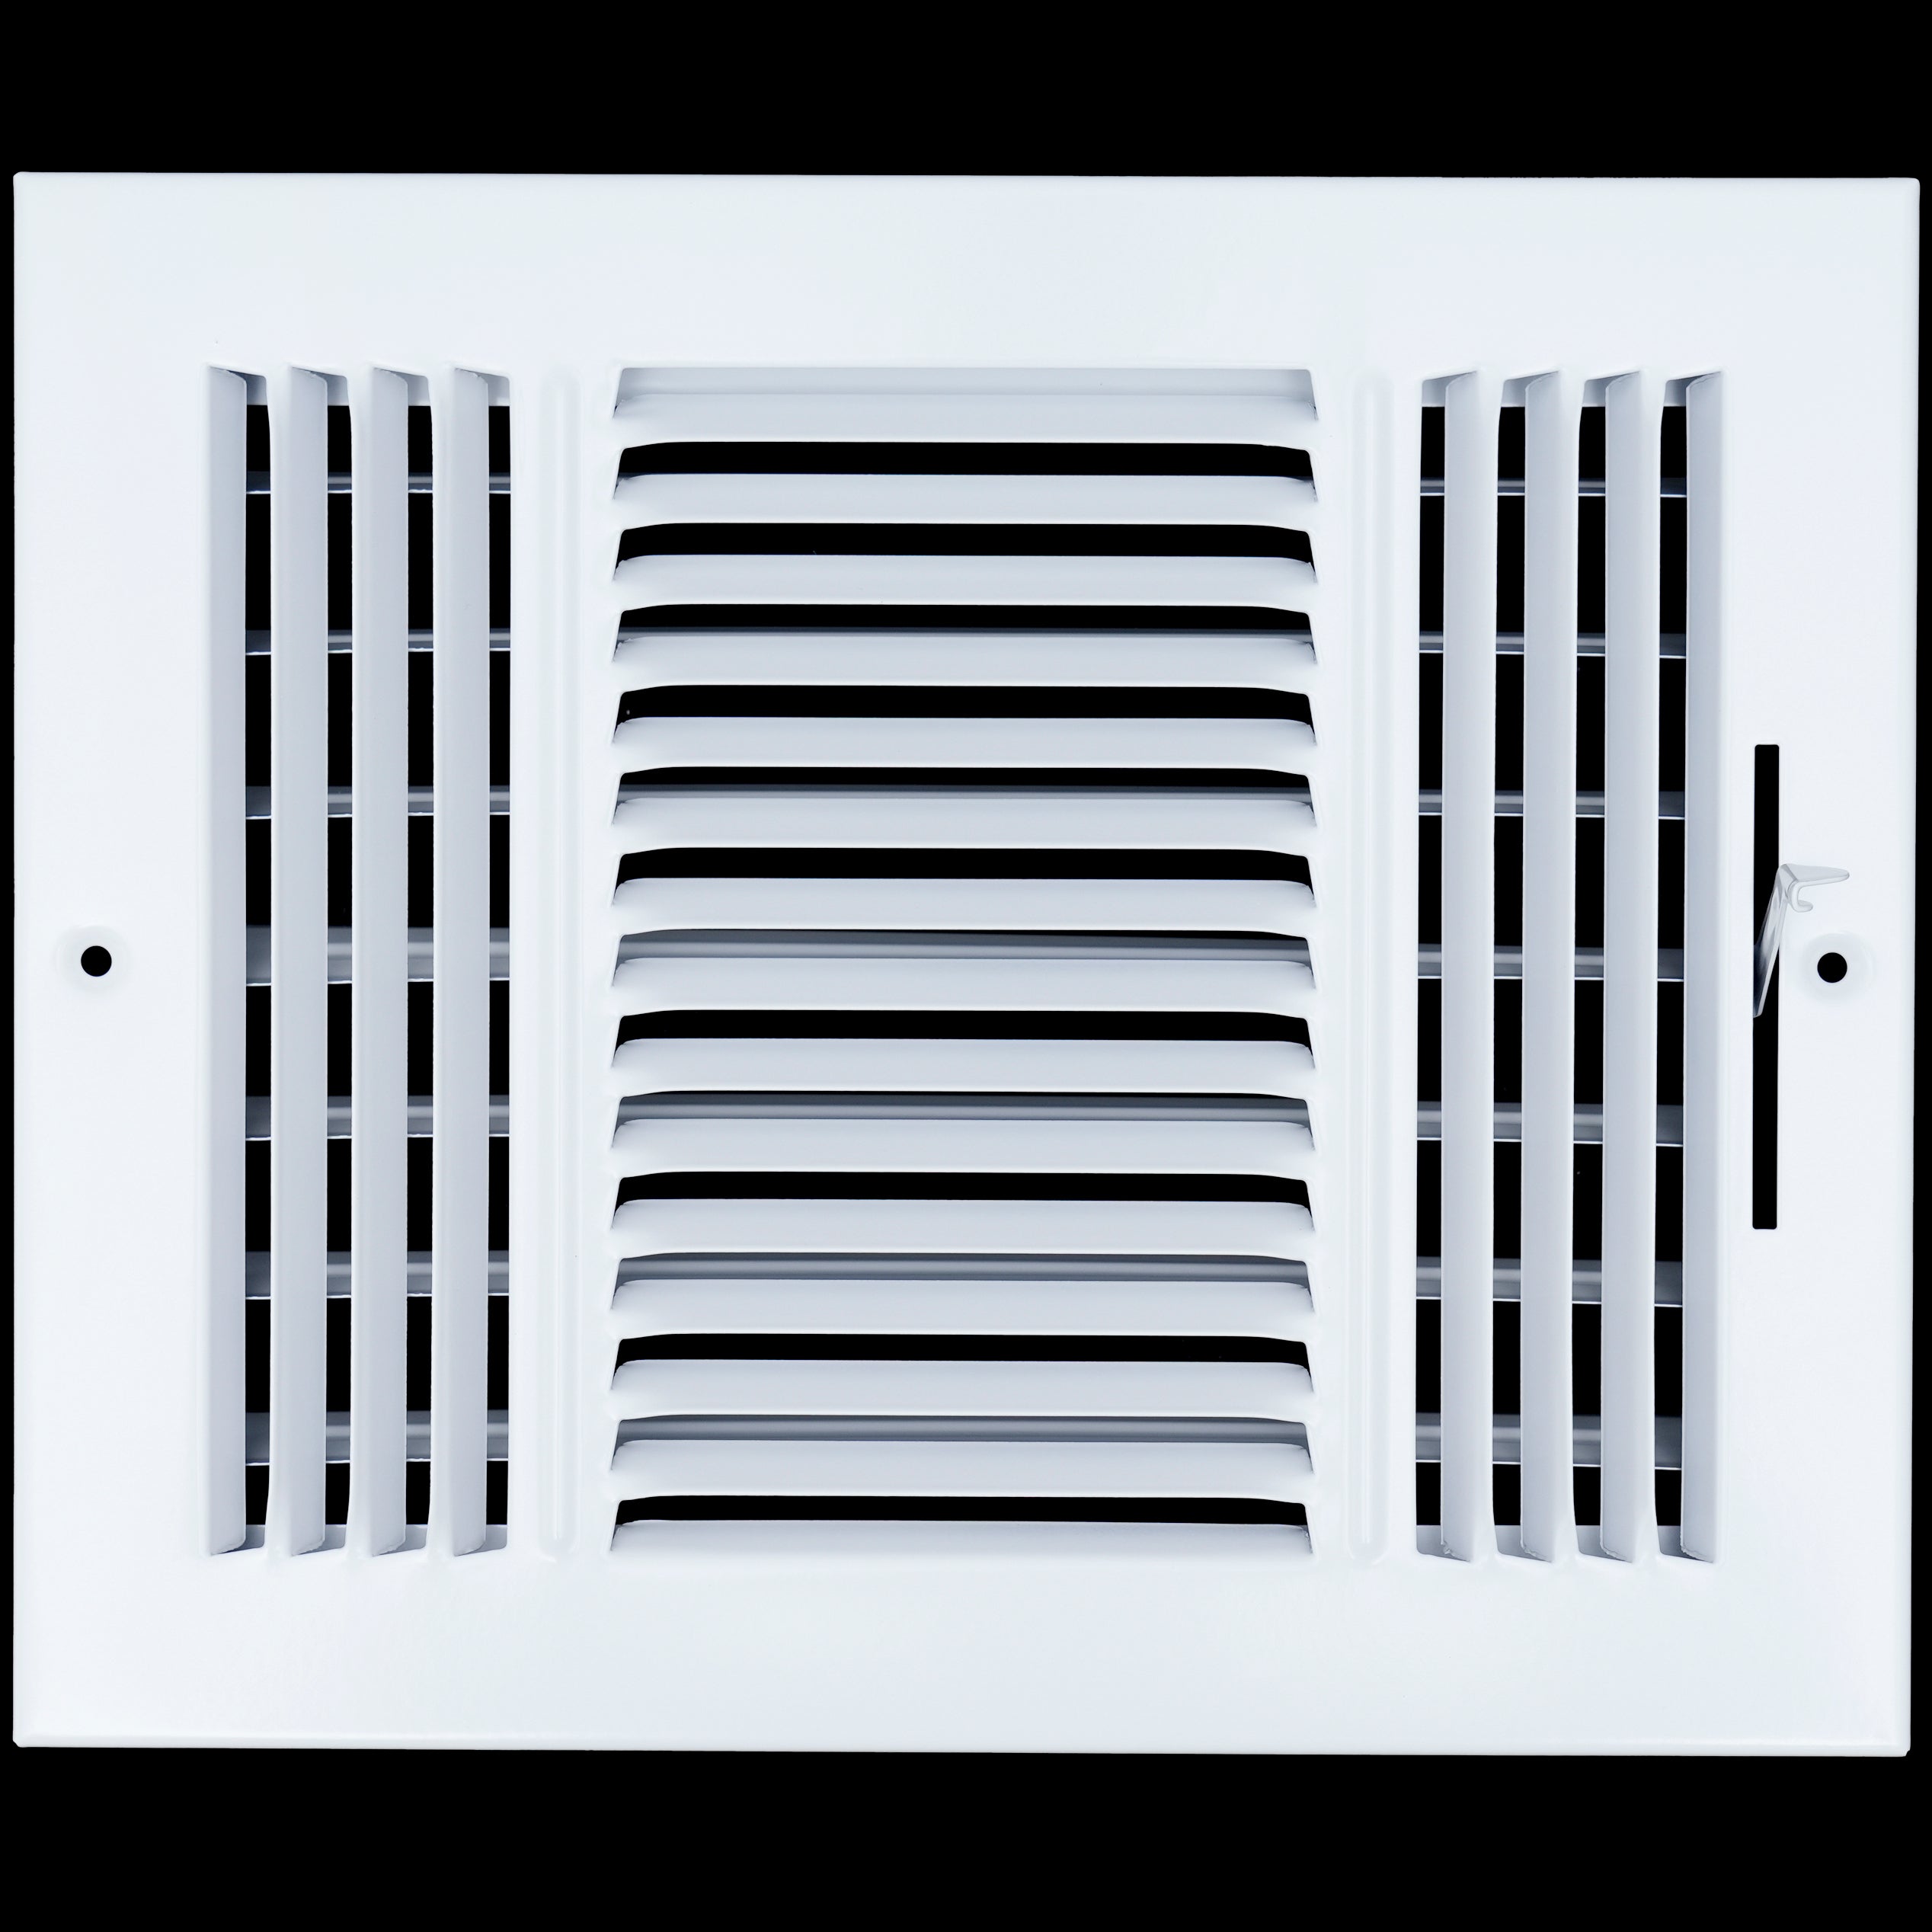 airgrilles 10 x 8 duct opening - 3 way steel air supply diffuser for sidewall and ceiling hnd-asg-wh-3way-10x8 764613097511 - 1